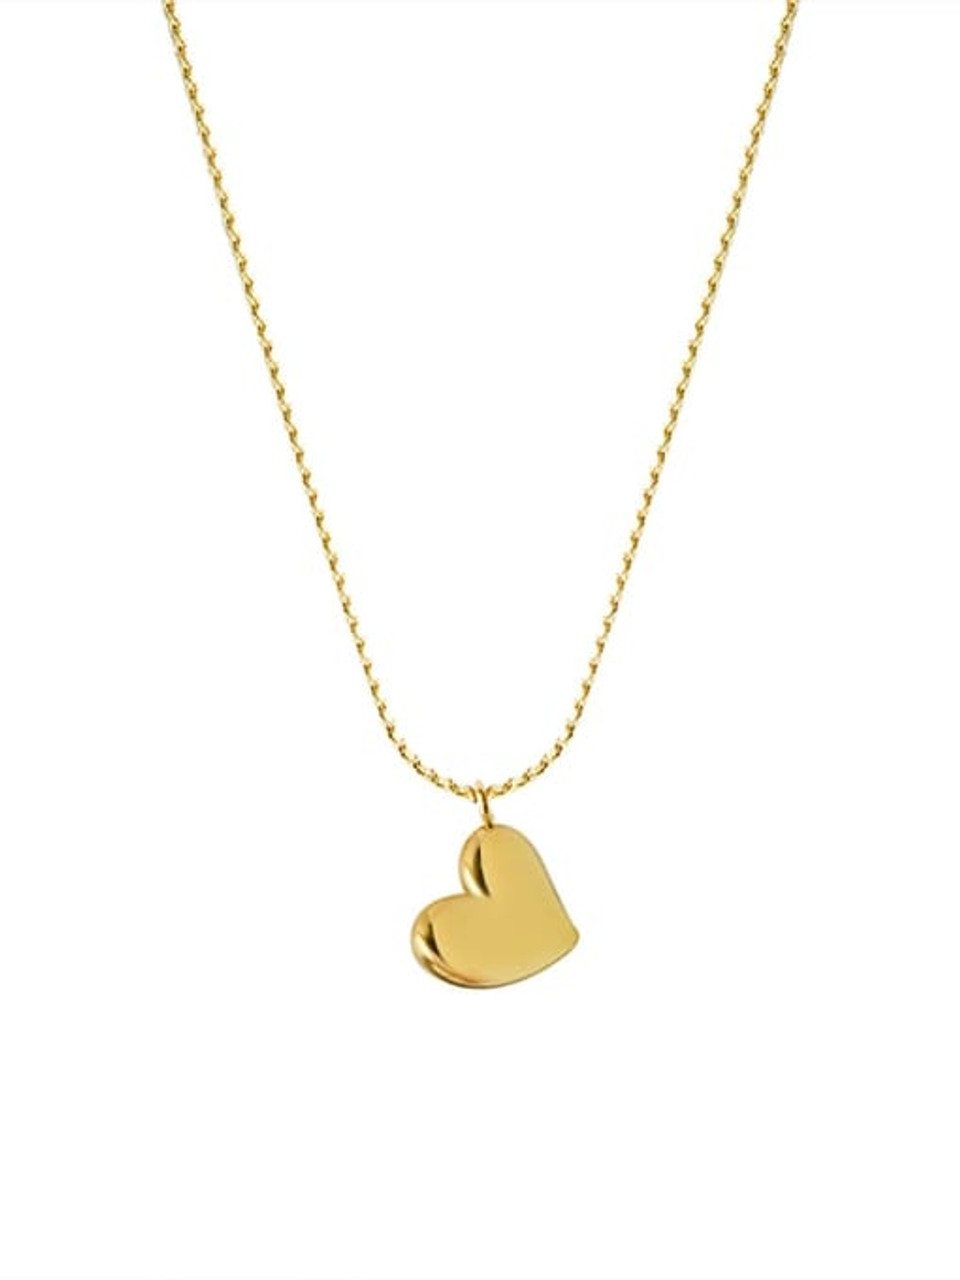 Teenie Tiny Heart Necklace in Gold and Silver by Jane Hollinger - NEWTWIST